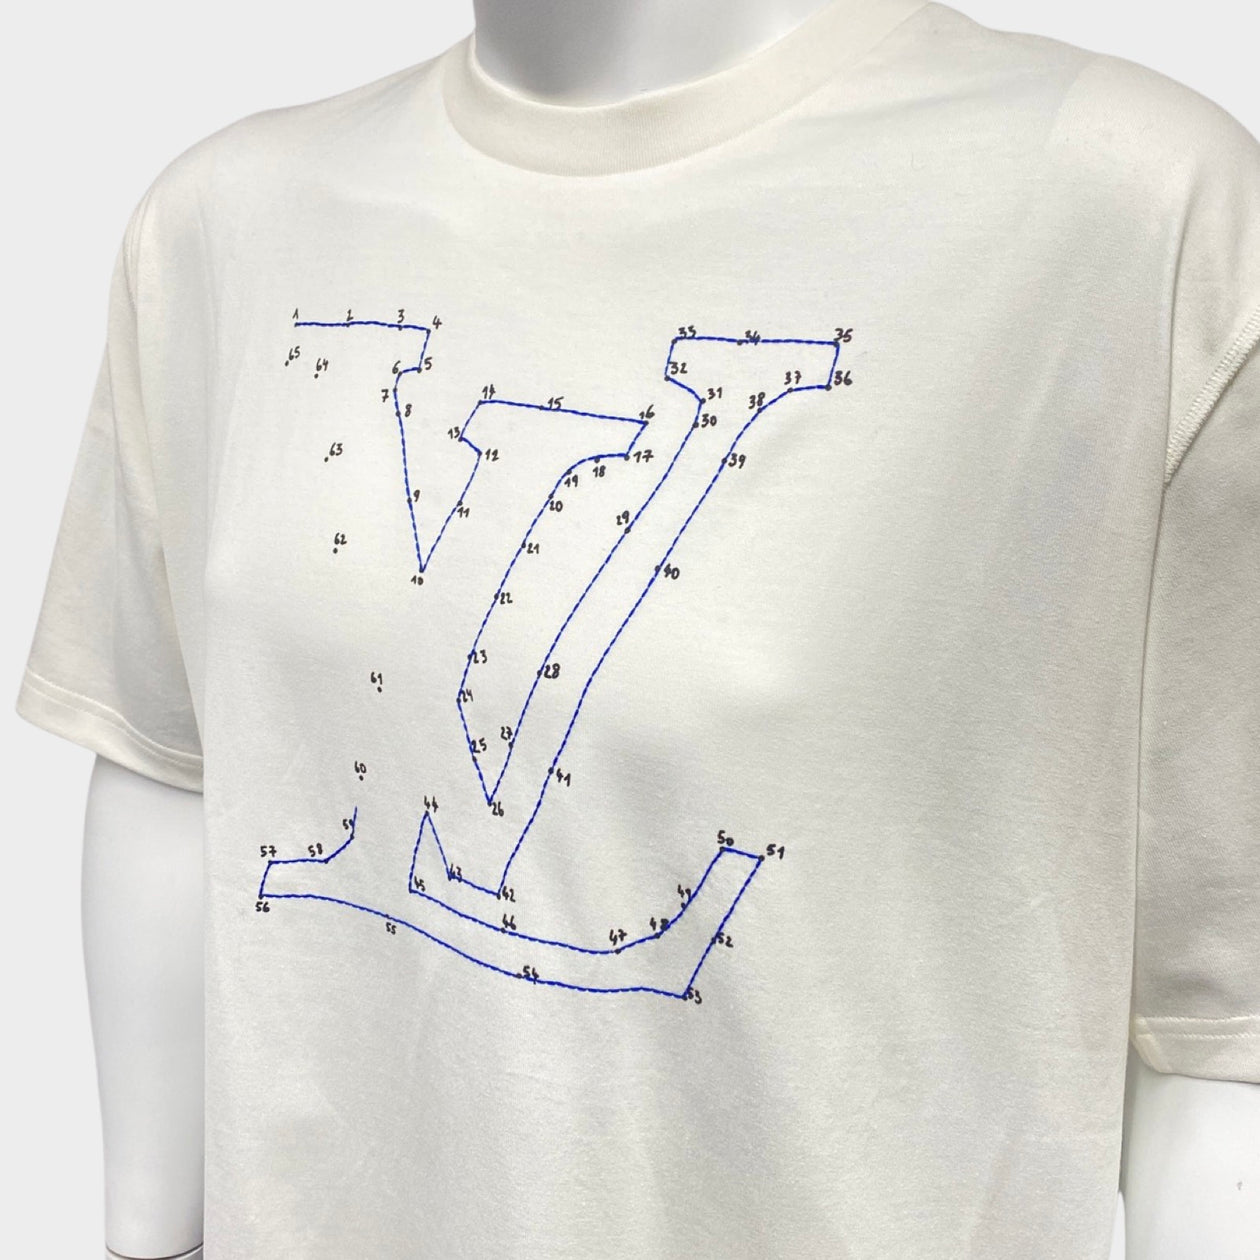 Louis Vuitton - Authenticated T-Shirt - Cotton White for Men, Very Good Condition